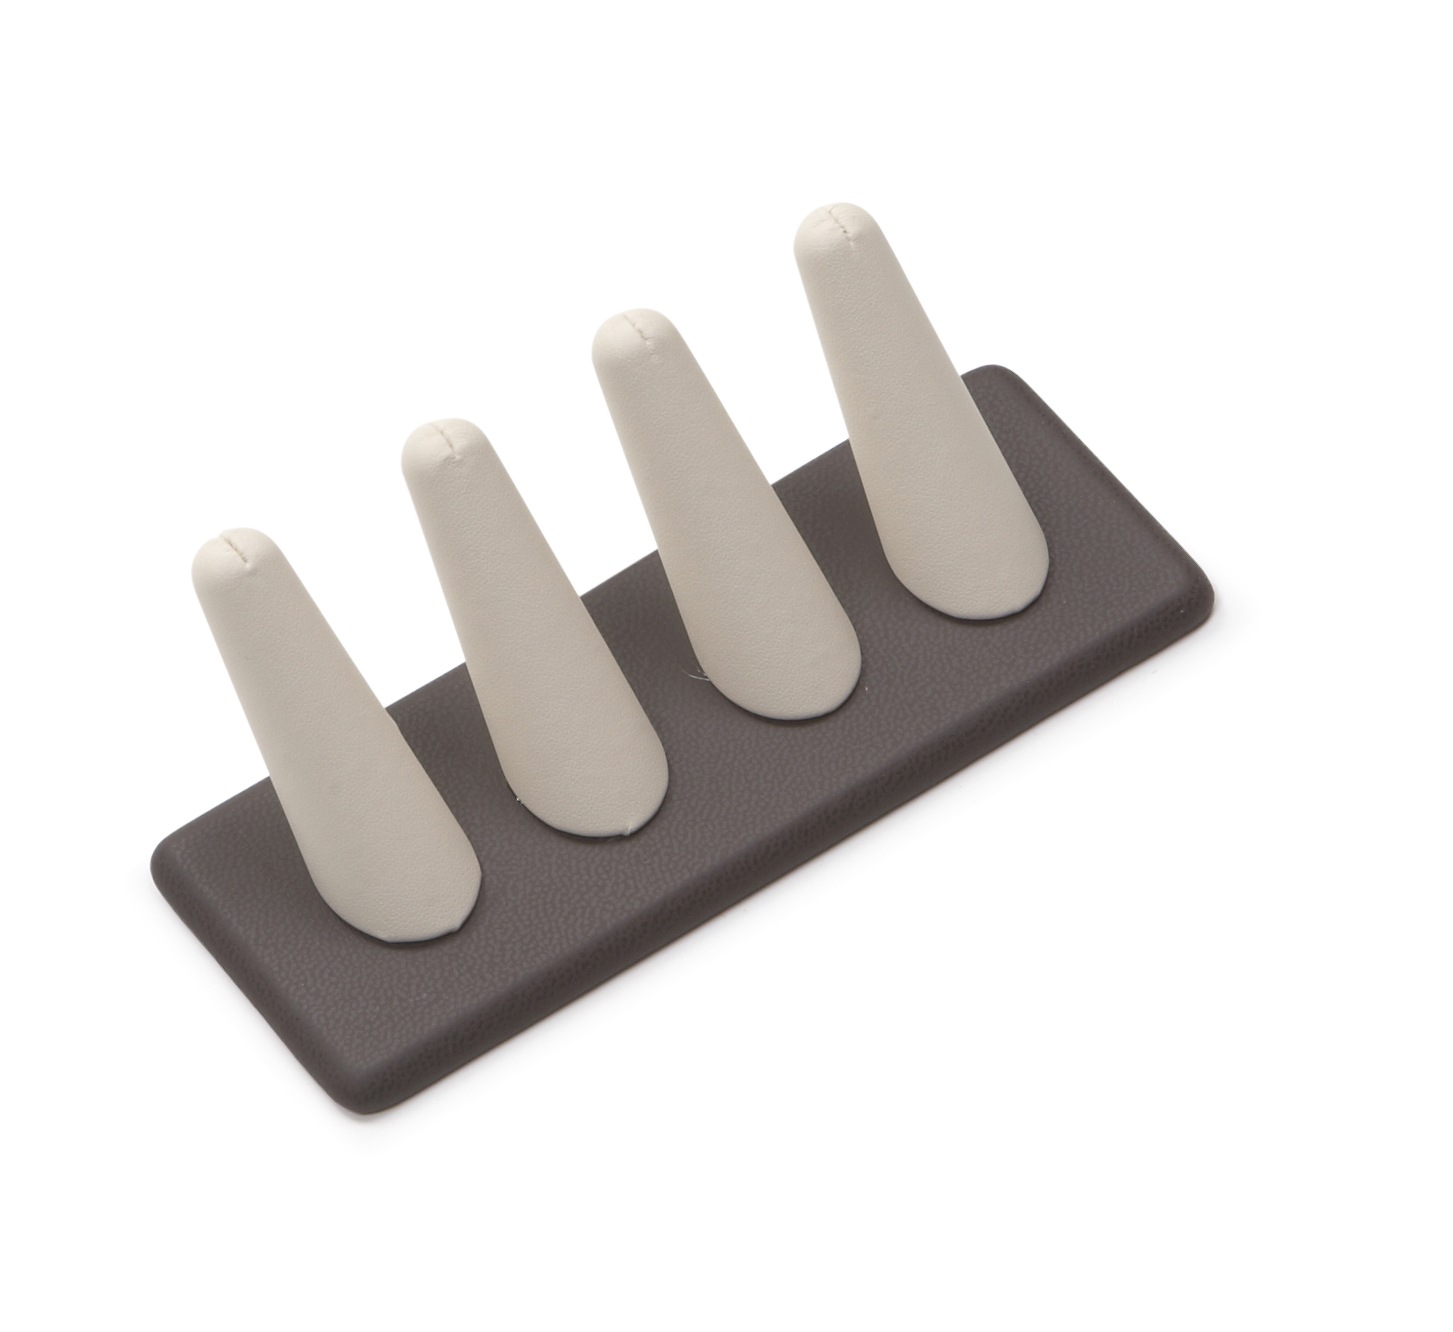 Chocolate/Beige Leatherette 4 Ring Stand